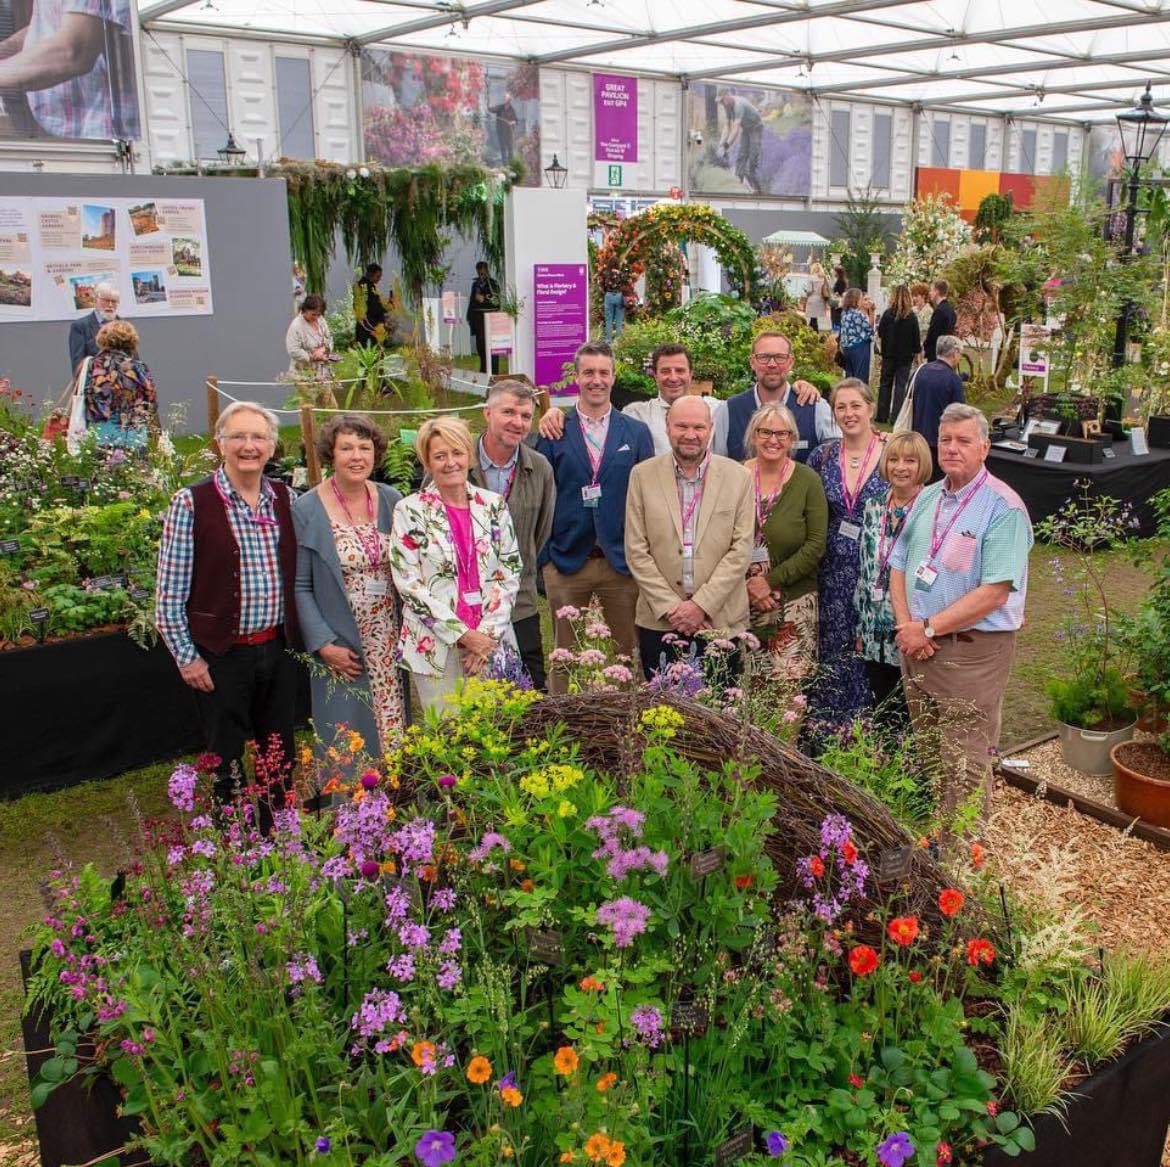 Plant Fairs Roadshow nurseries 2023, AND THEY’RE BACK IN 2024! @perennialpotty @swallowfields1 @PelhamPlants Miles Japanese Maples @Plantbaseuk @NoNameNursery @specialplants (returning to @The_RHS Chelsea Flower Show after 25 years!) in Gt Pavilion @GdnMediaGuild @Vikki_Rimmer